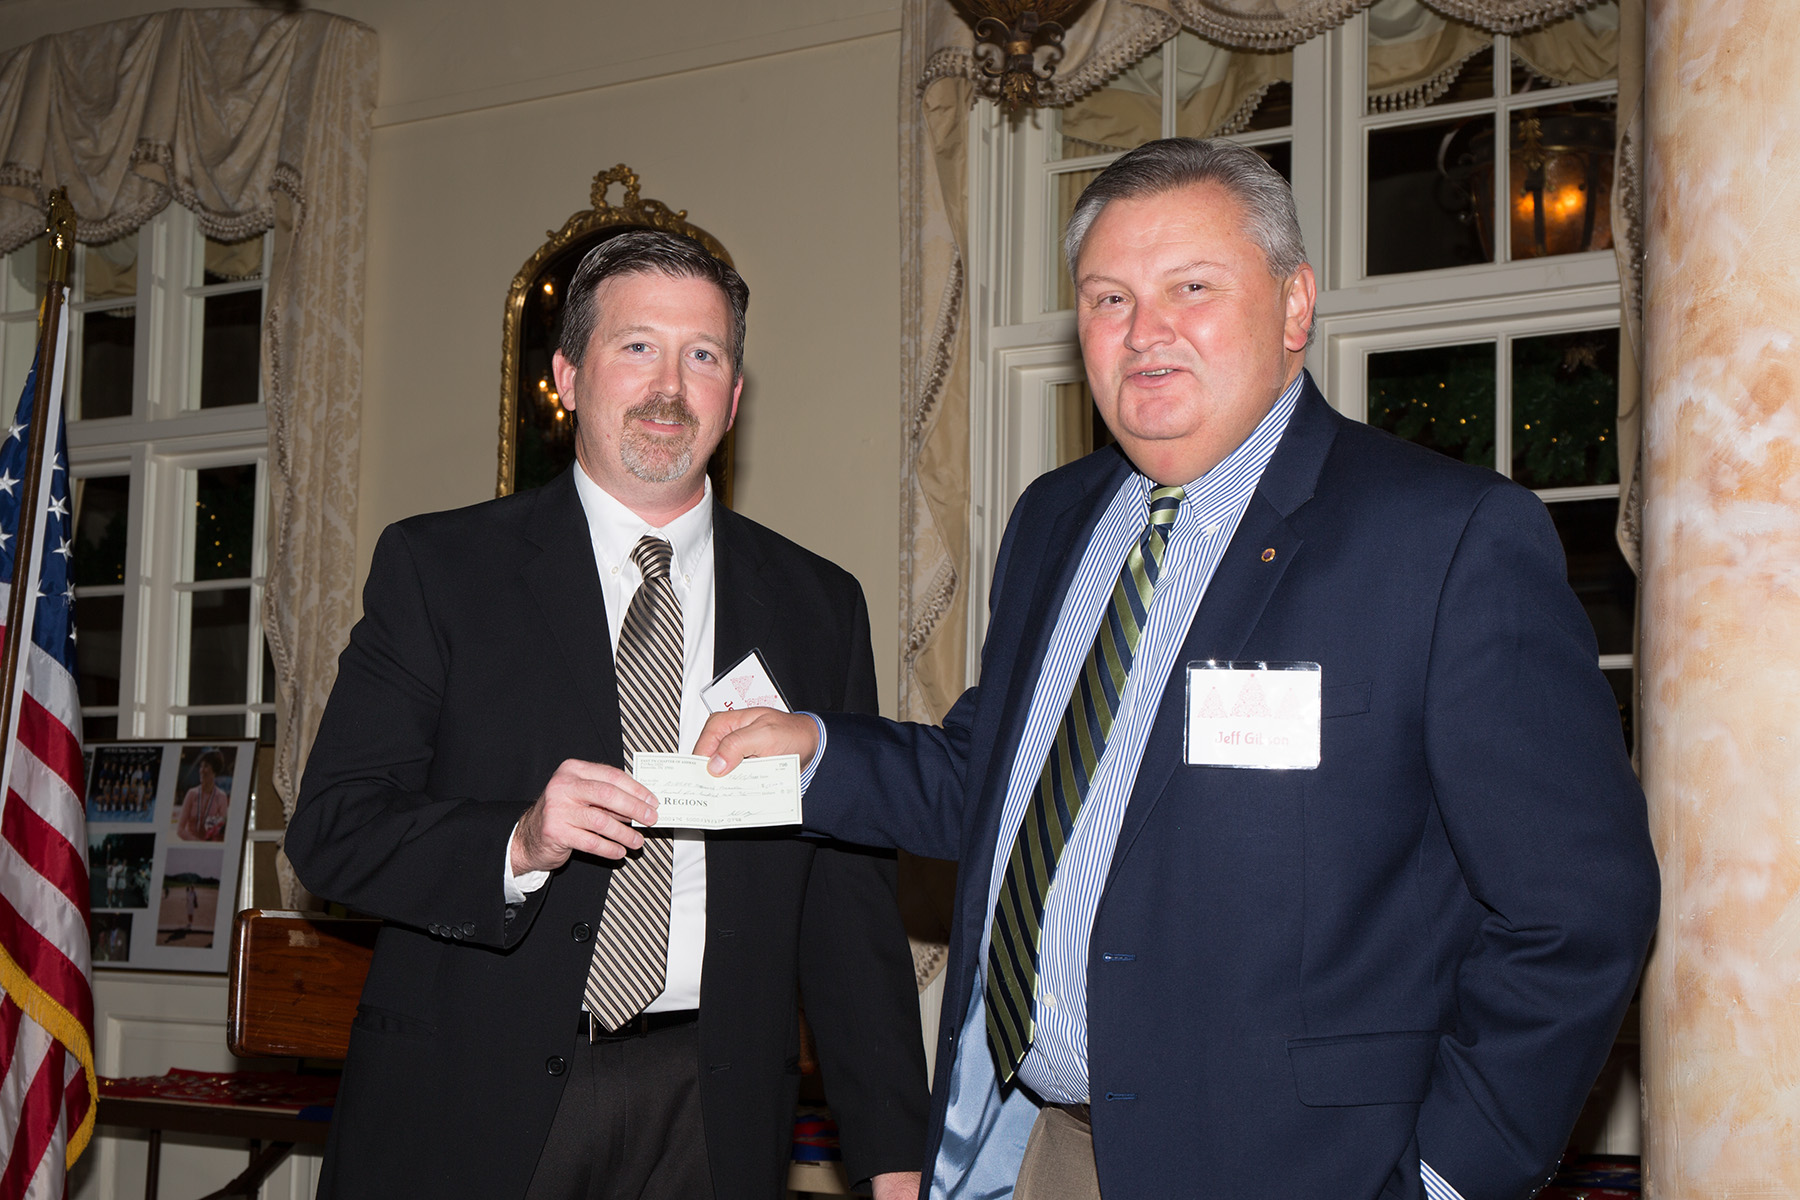  Jeff Gibson presents Jeff DeLong with a $1500.00 check for Research Promotion! 